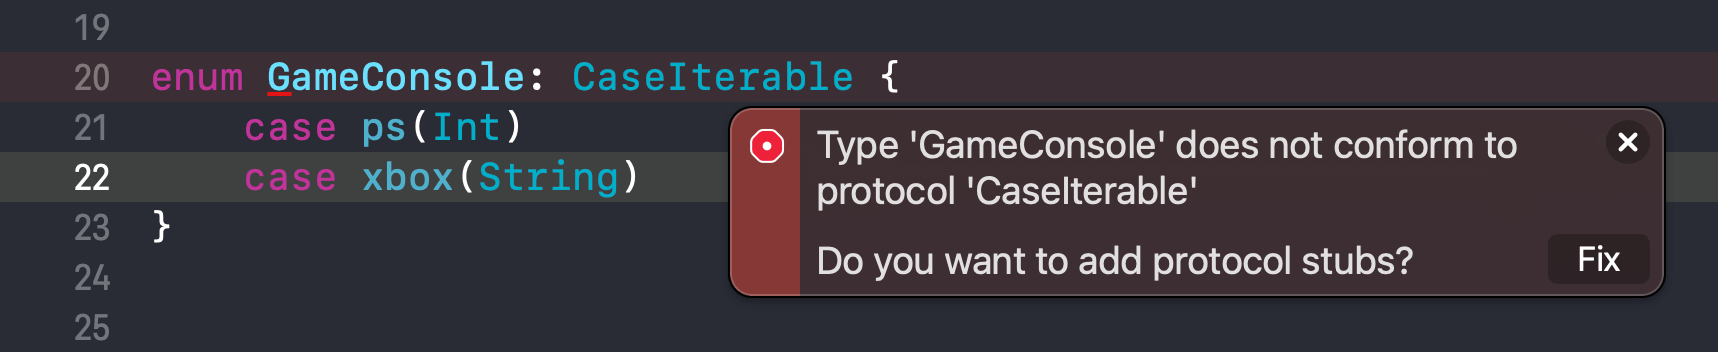 Does not conform to protocol CaseIterable.